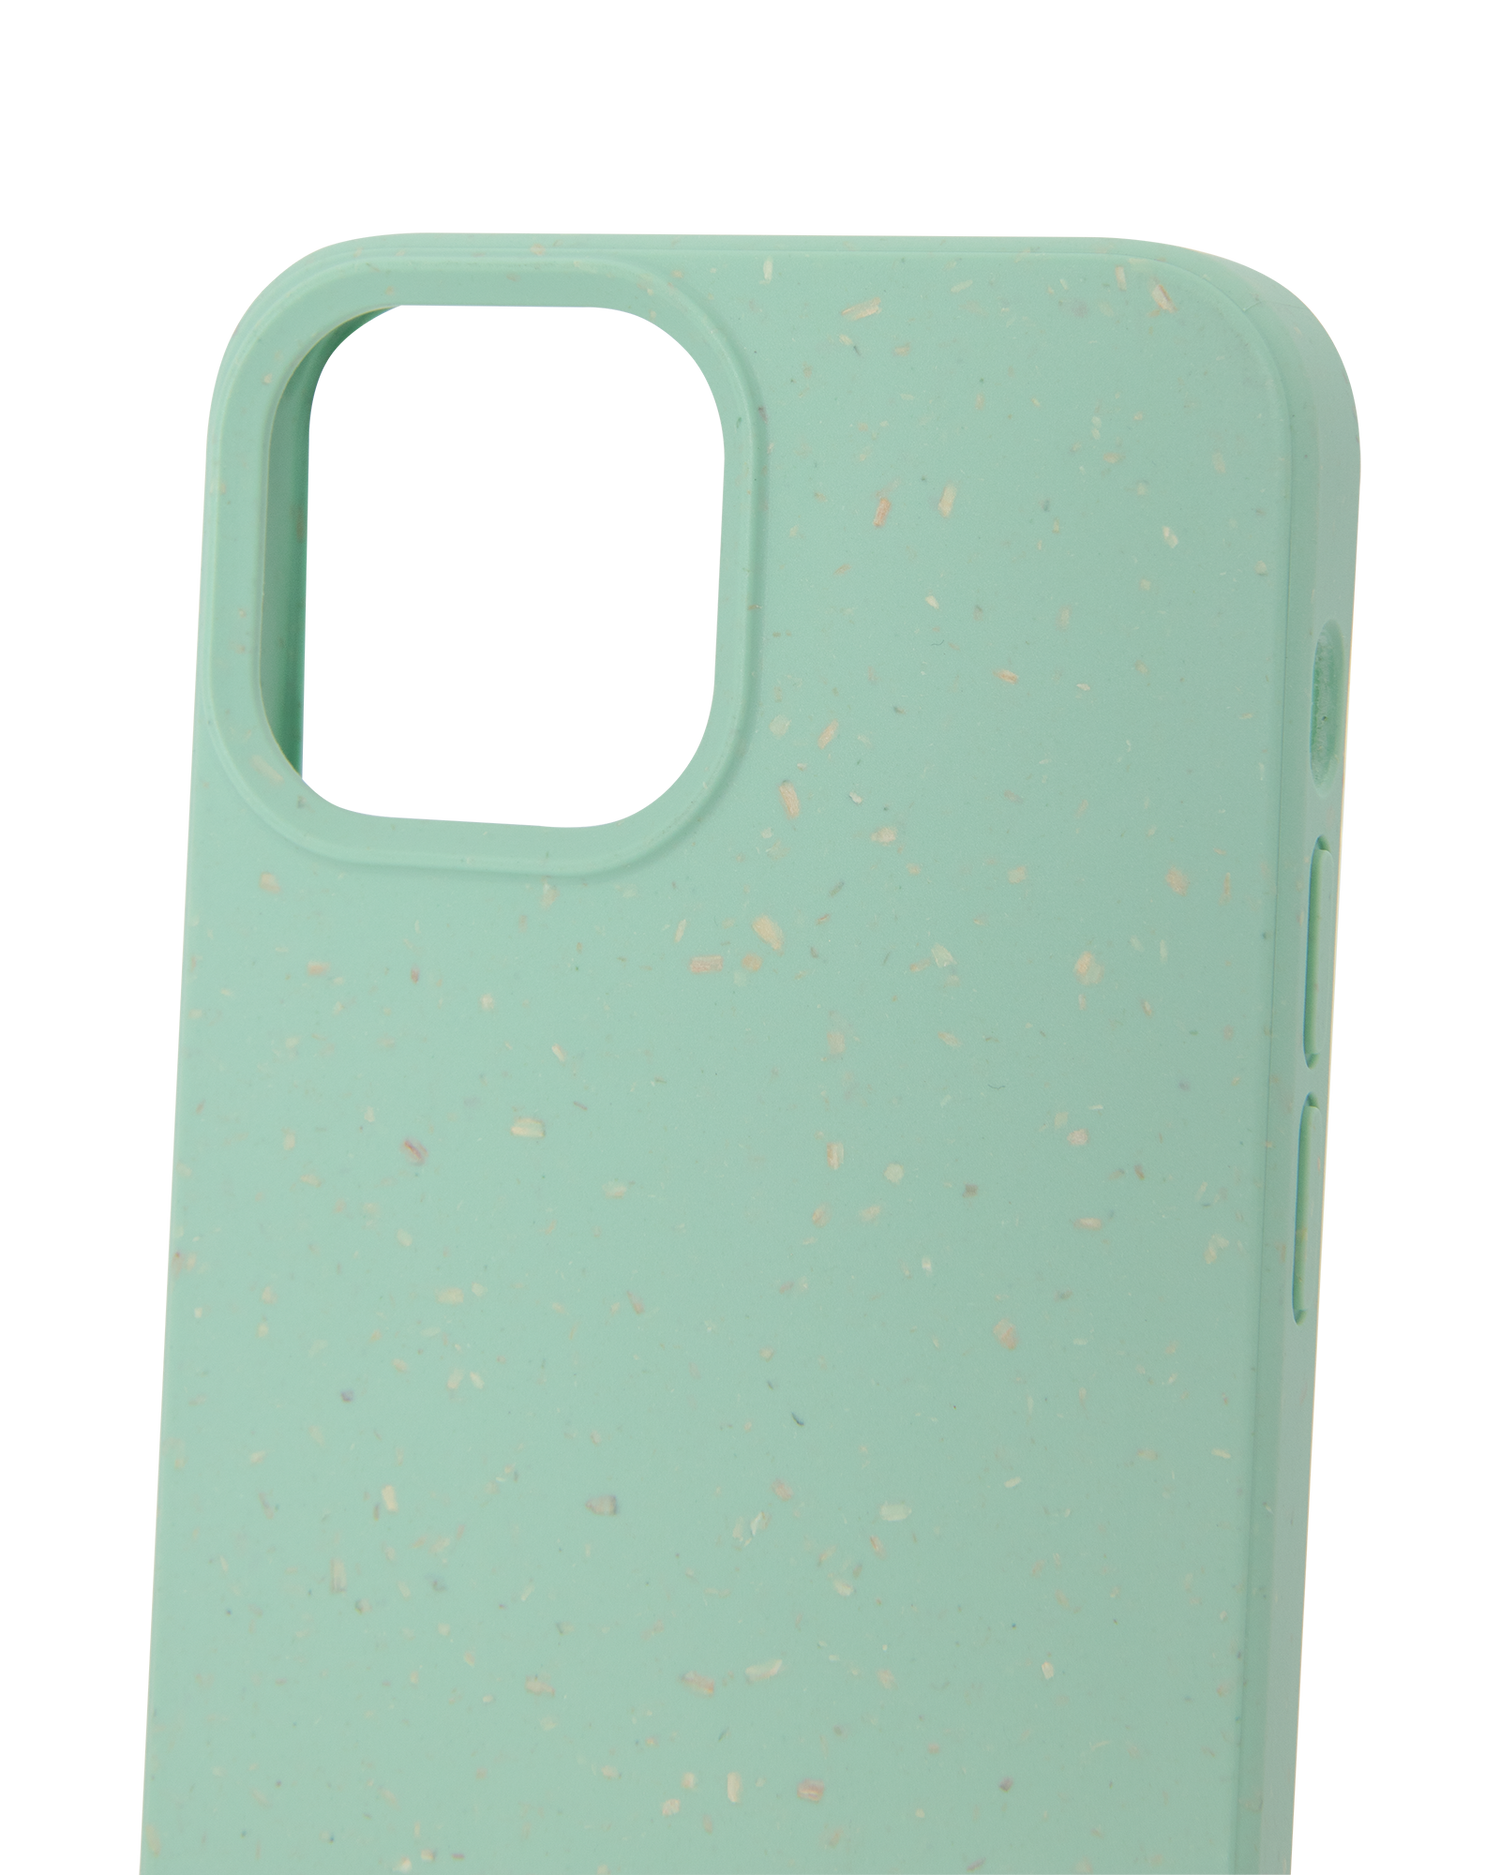 Light Green Eco-Friendly Phone Case for Apple iPhone 13 mini: Details outside